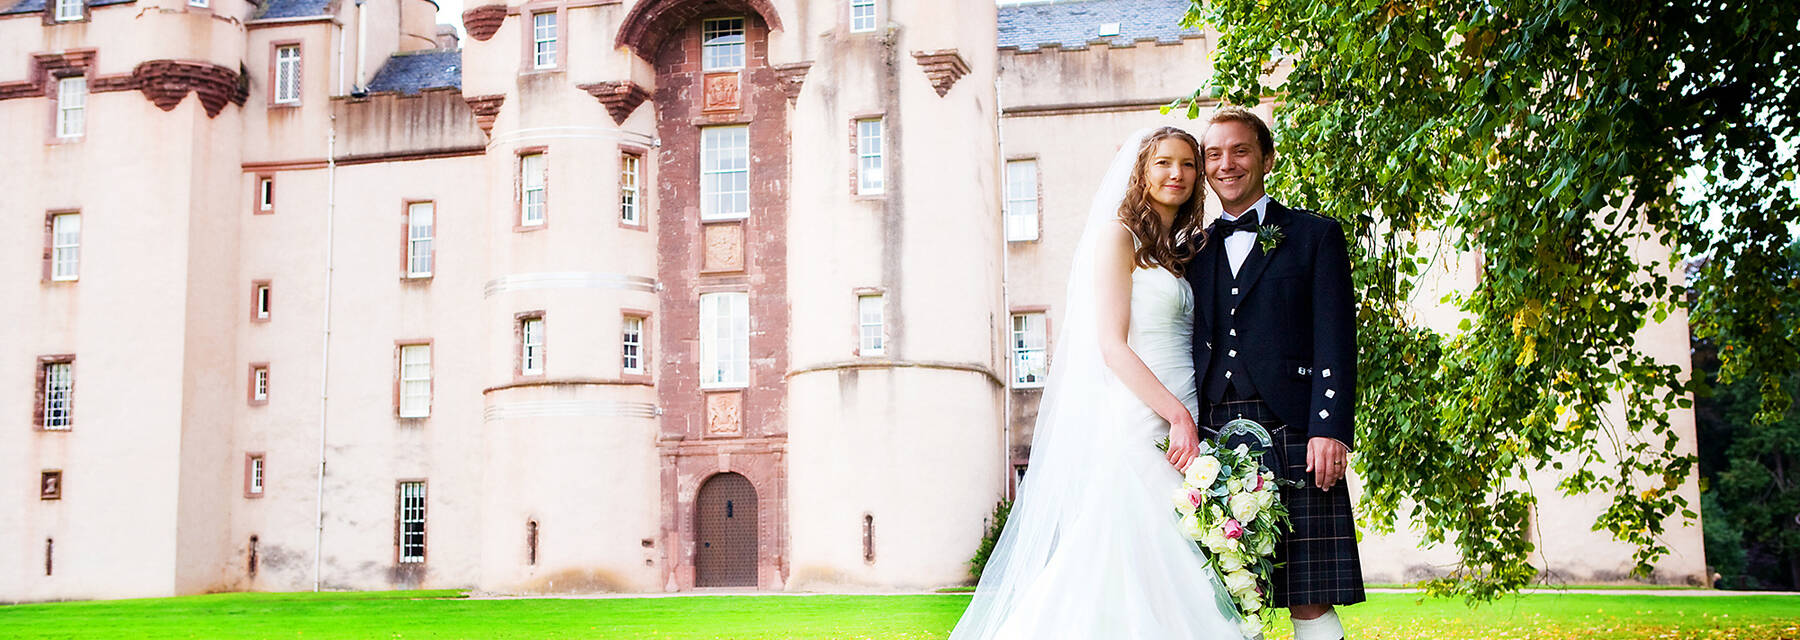 A wedding couple stand on the lawn in front of Fyvie Castle, beside a large tree.